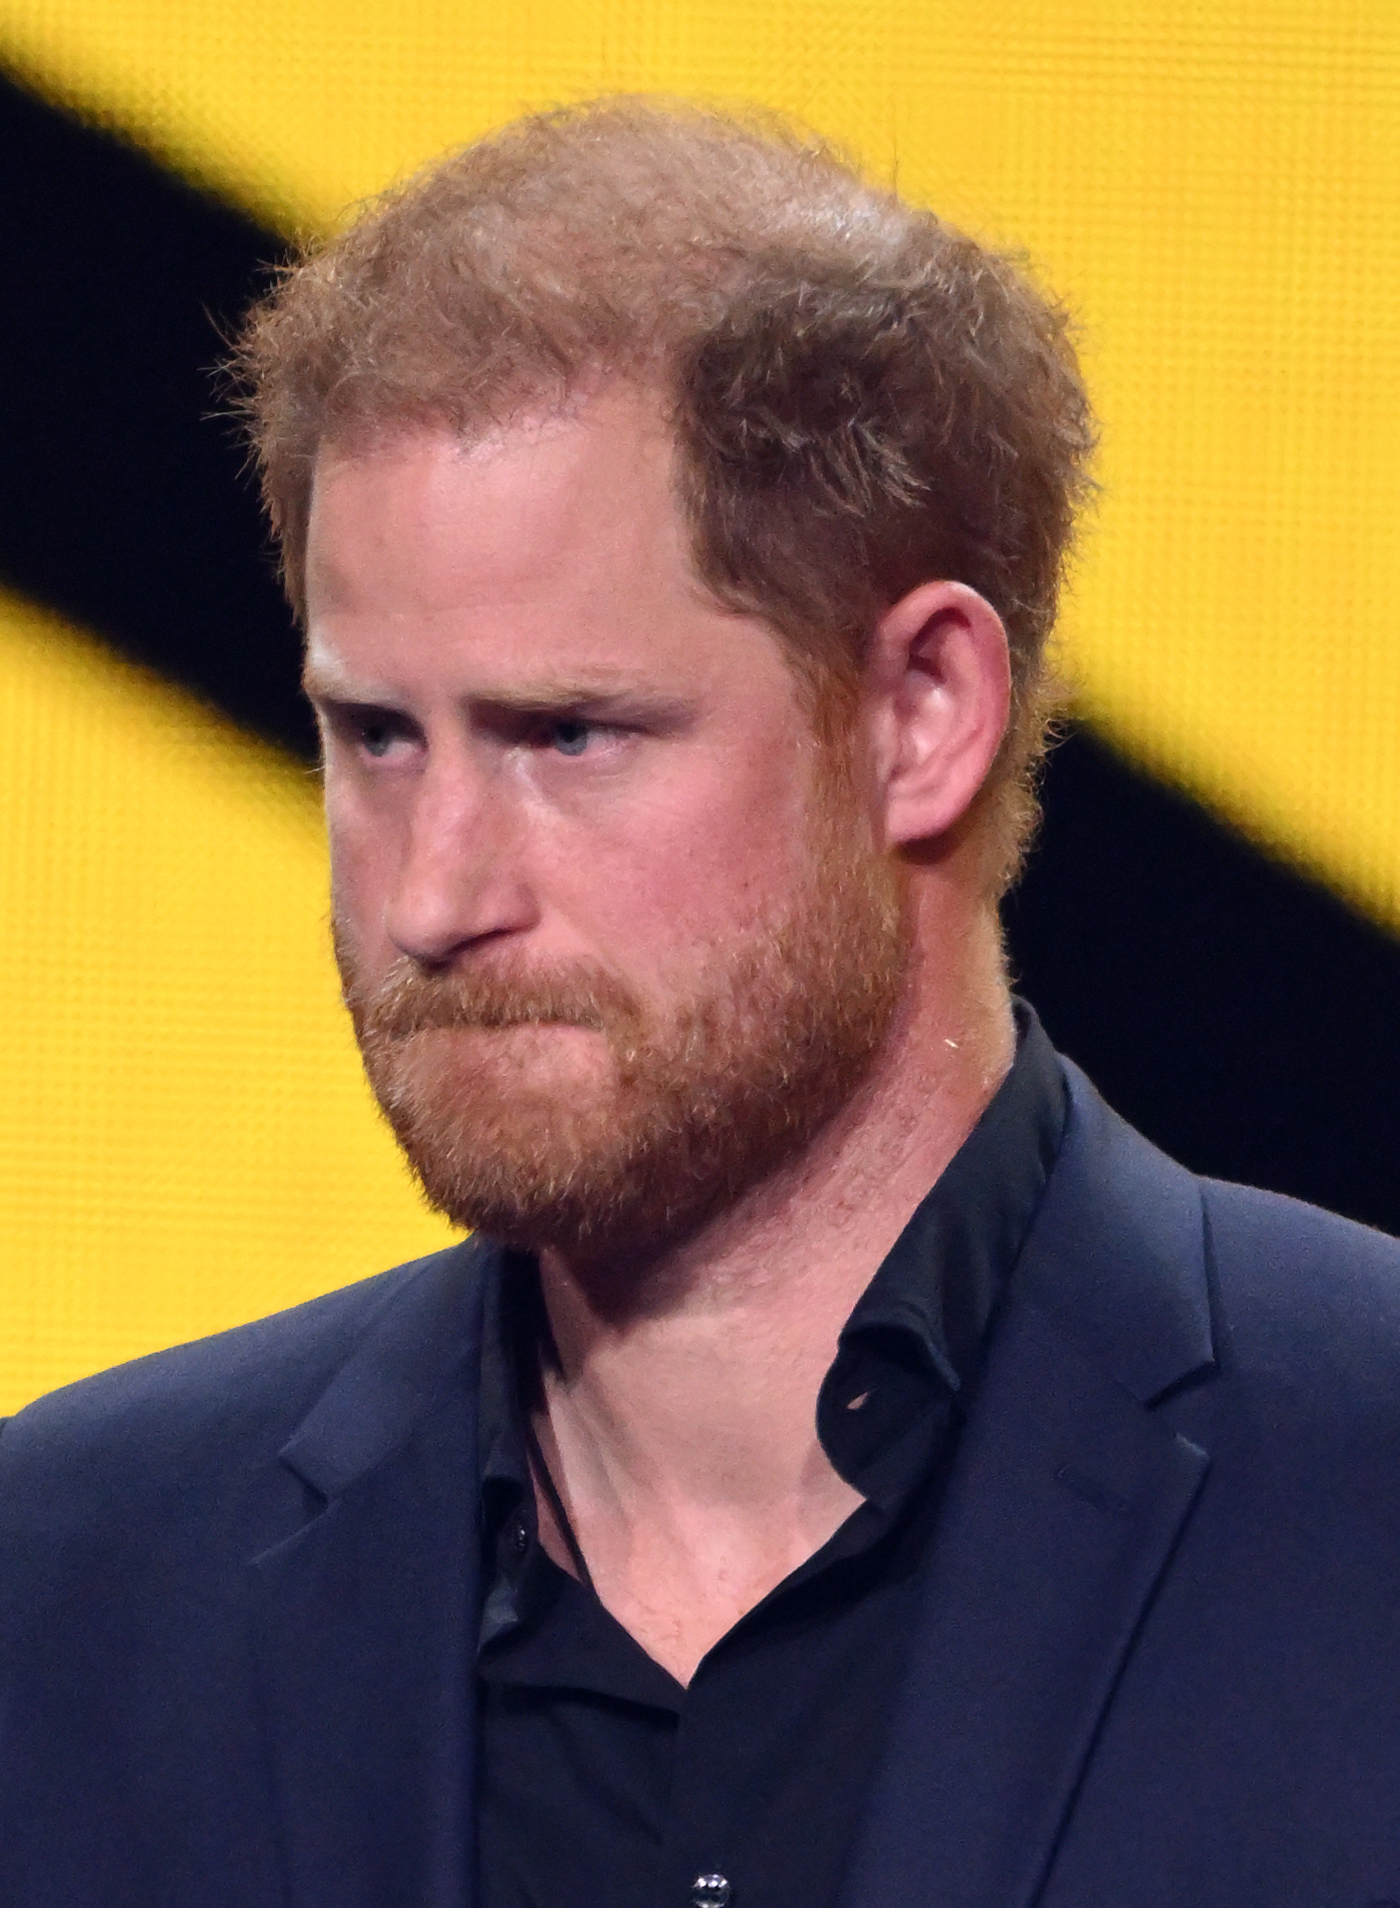 Prince Harry, Duke of Sussex makes a speech during the closing ceremony of the Invictus Games Düsseldorf at Merkur Spiel-Arena in Dusseldorf, Germany on September 16, 2023. | Source: Getty Images